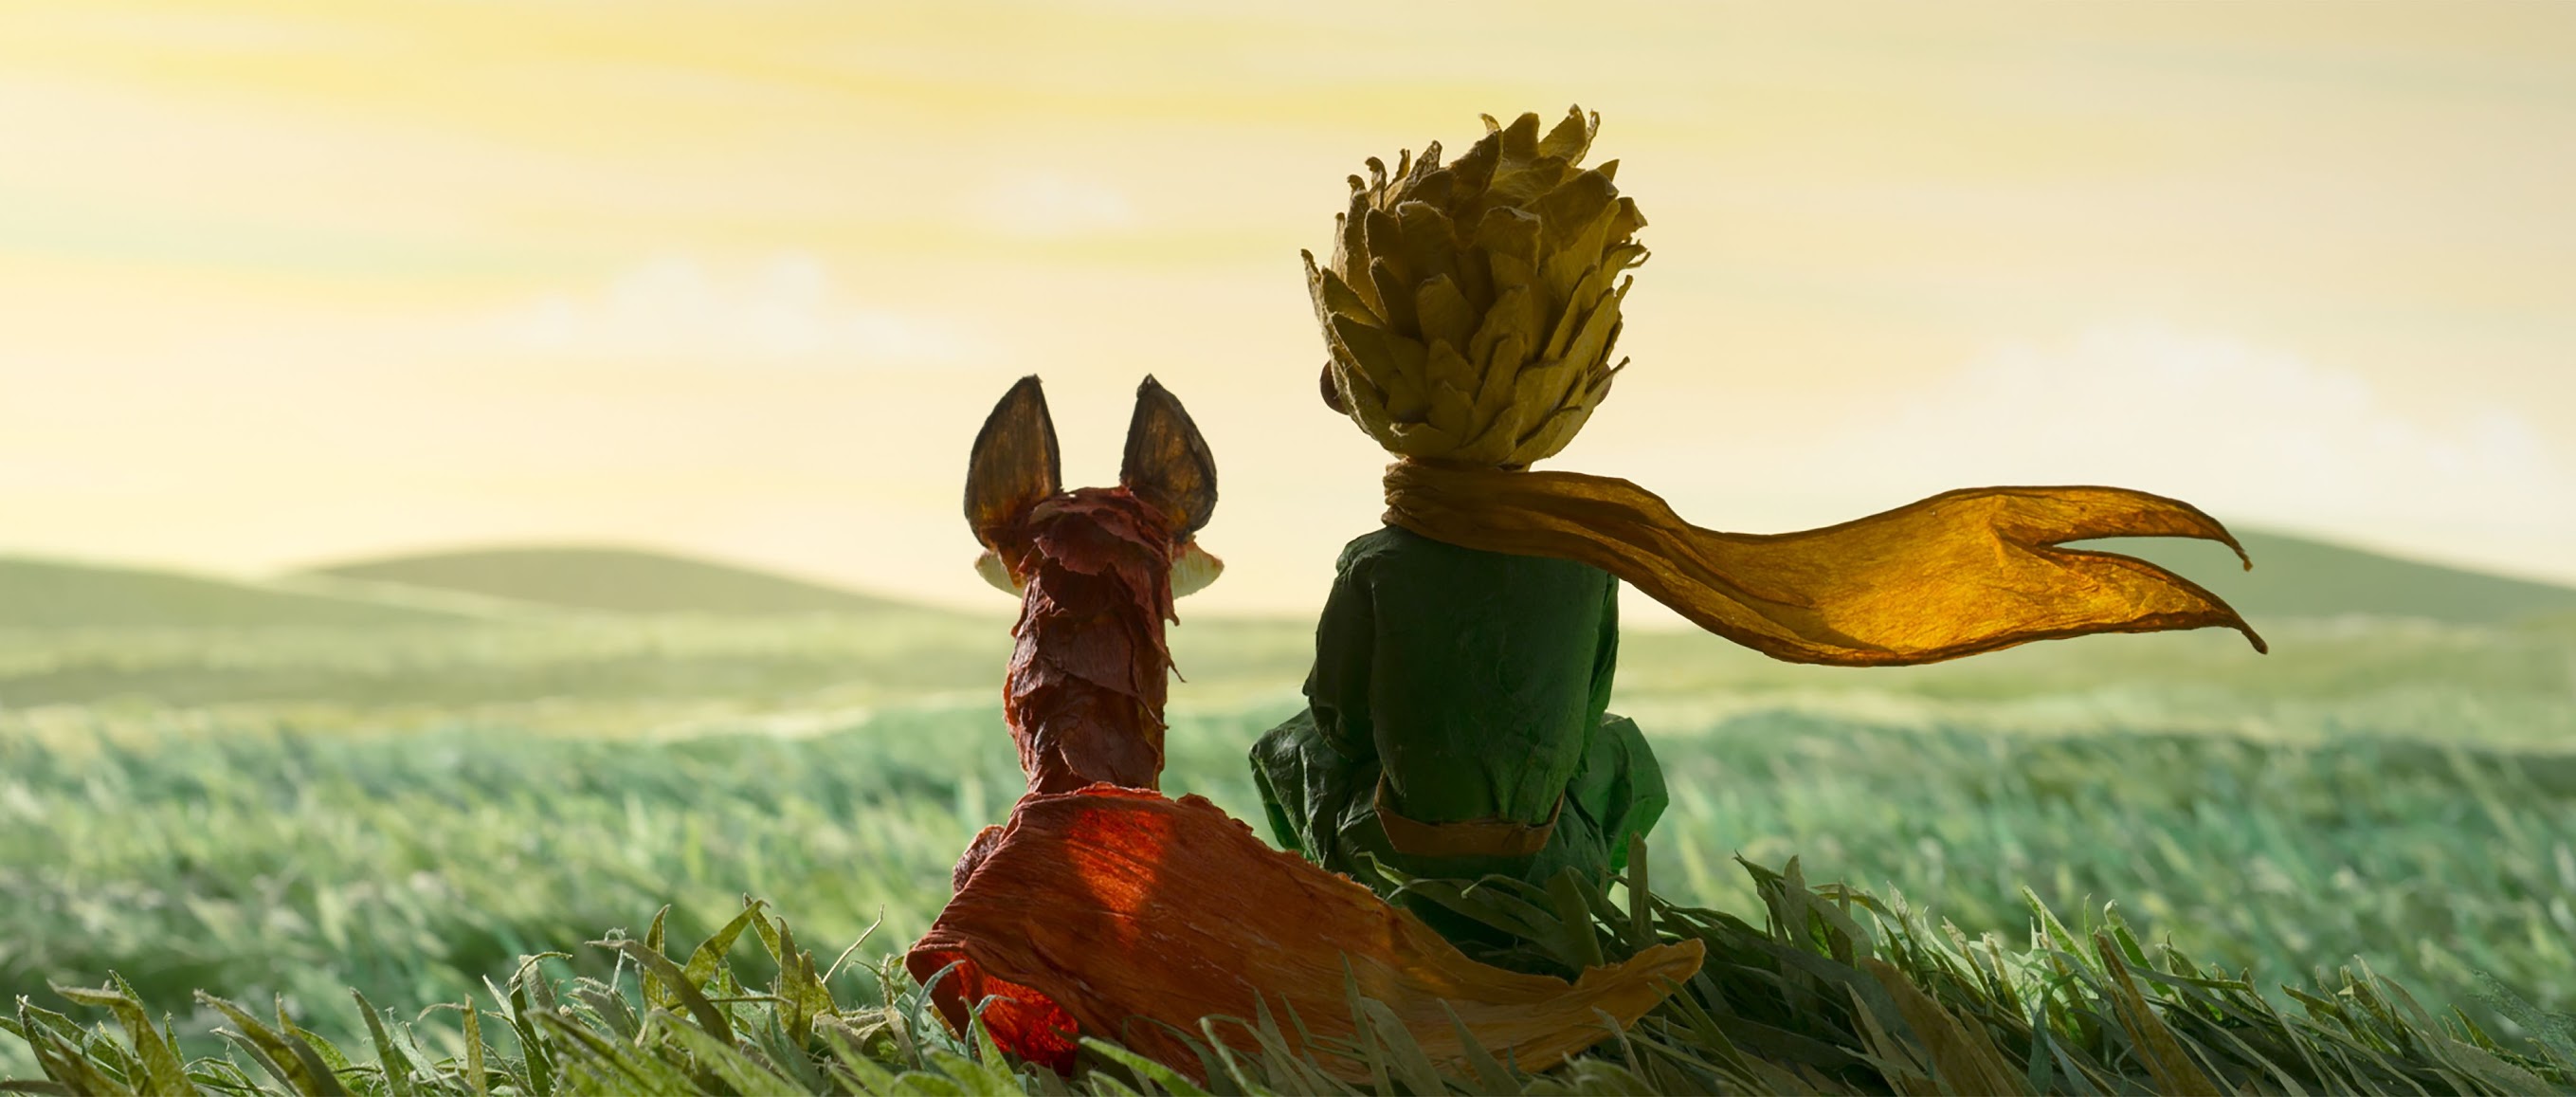 49 The Little Prince Hd Wallpapers Backgrounds Wallpaper Abyss